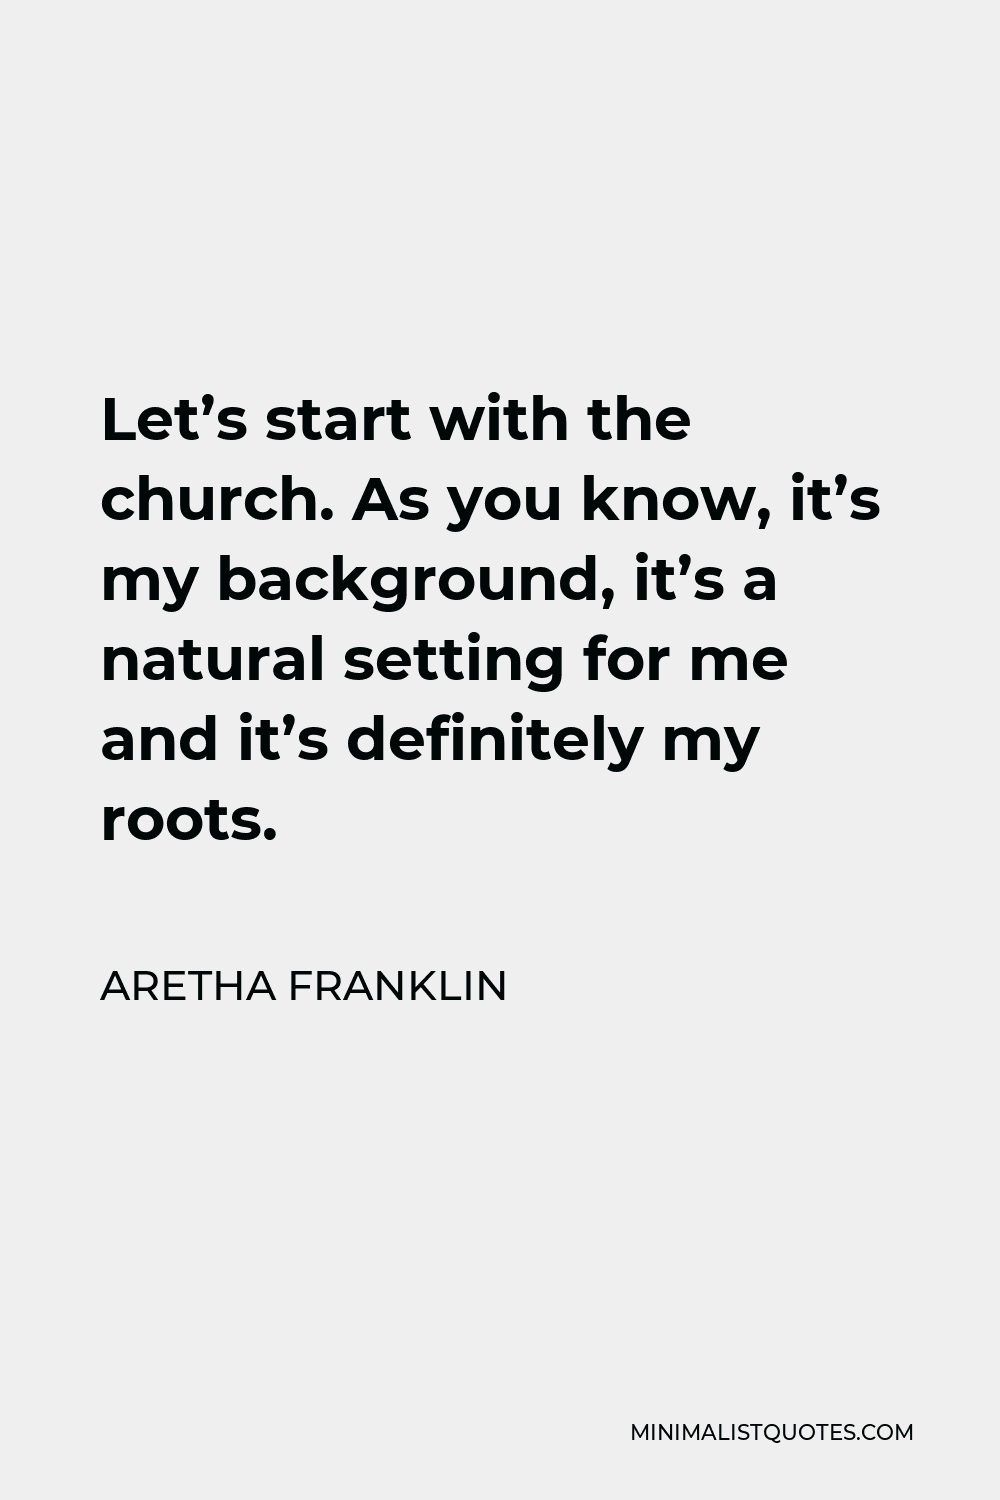 Aretha Franklin Quote - Let’s start with the church. As you know, it’s my background, it’s a natural setting for me and it’s definitely my roots.